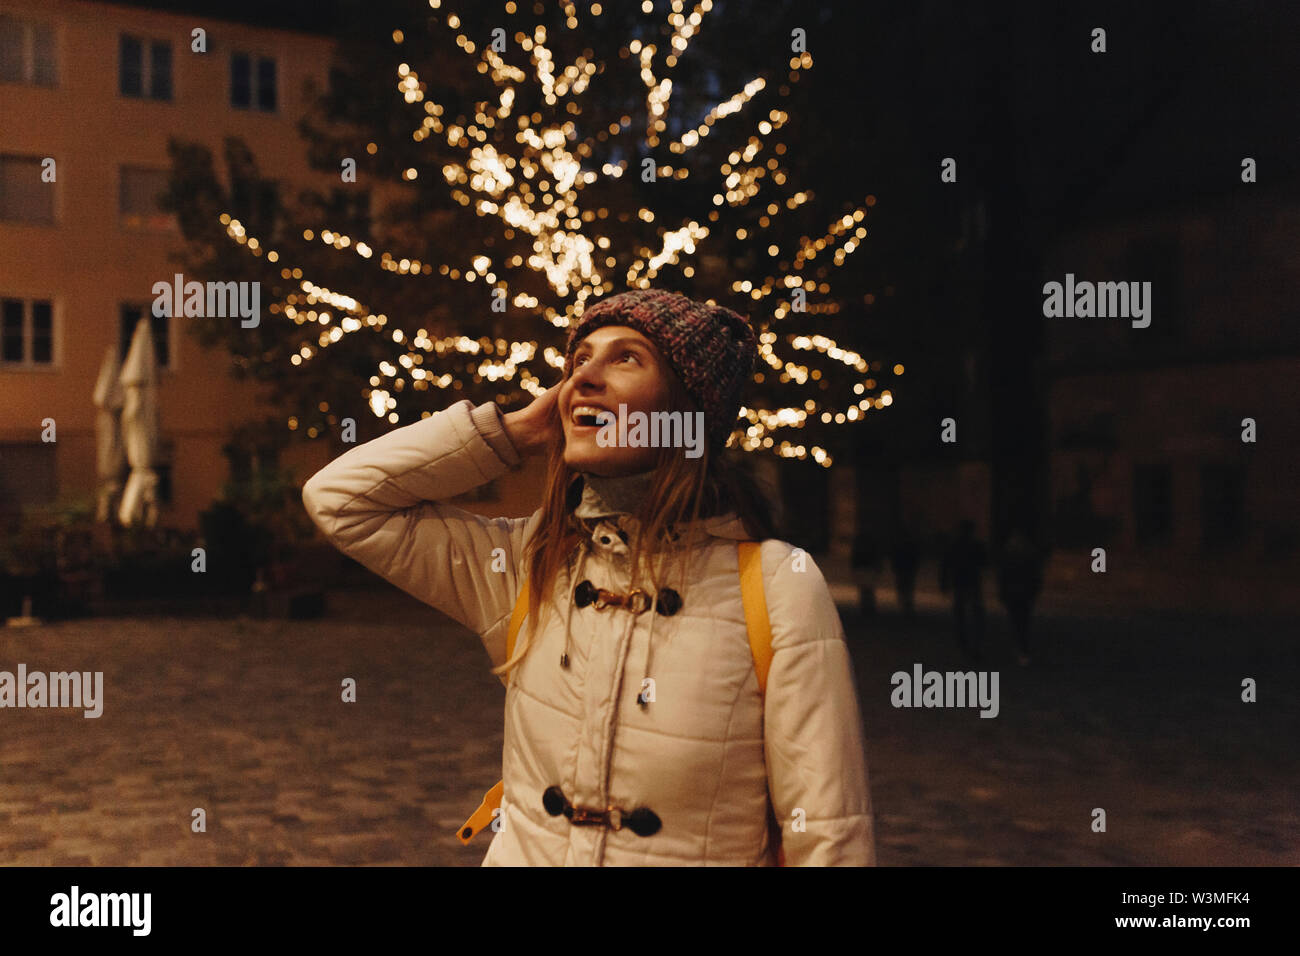 Smiling woman wearing coat par fairy lights in tree at night Banque D'Images